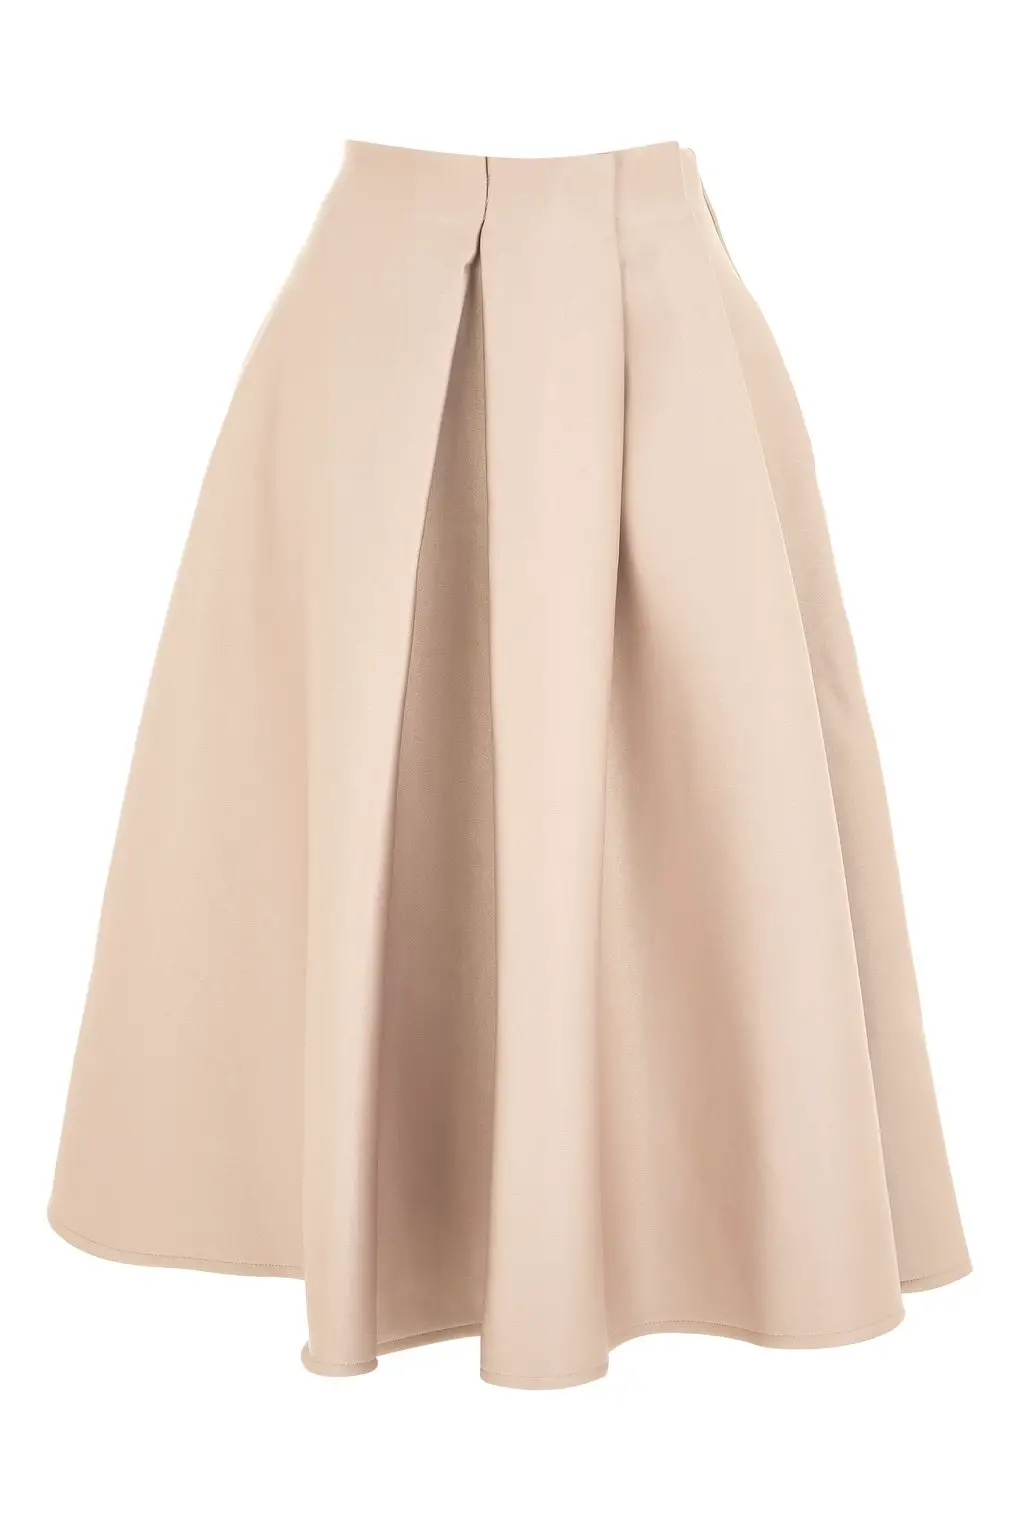 Topshop pleated prom skirt